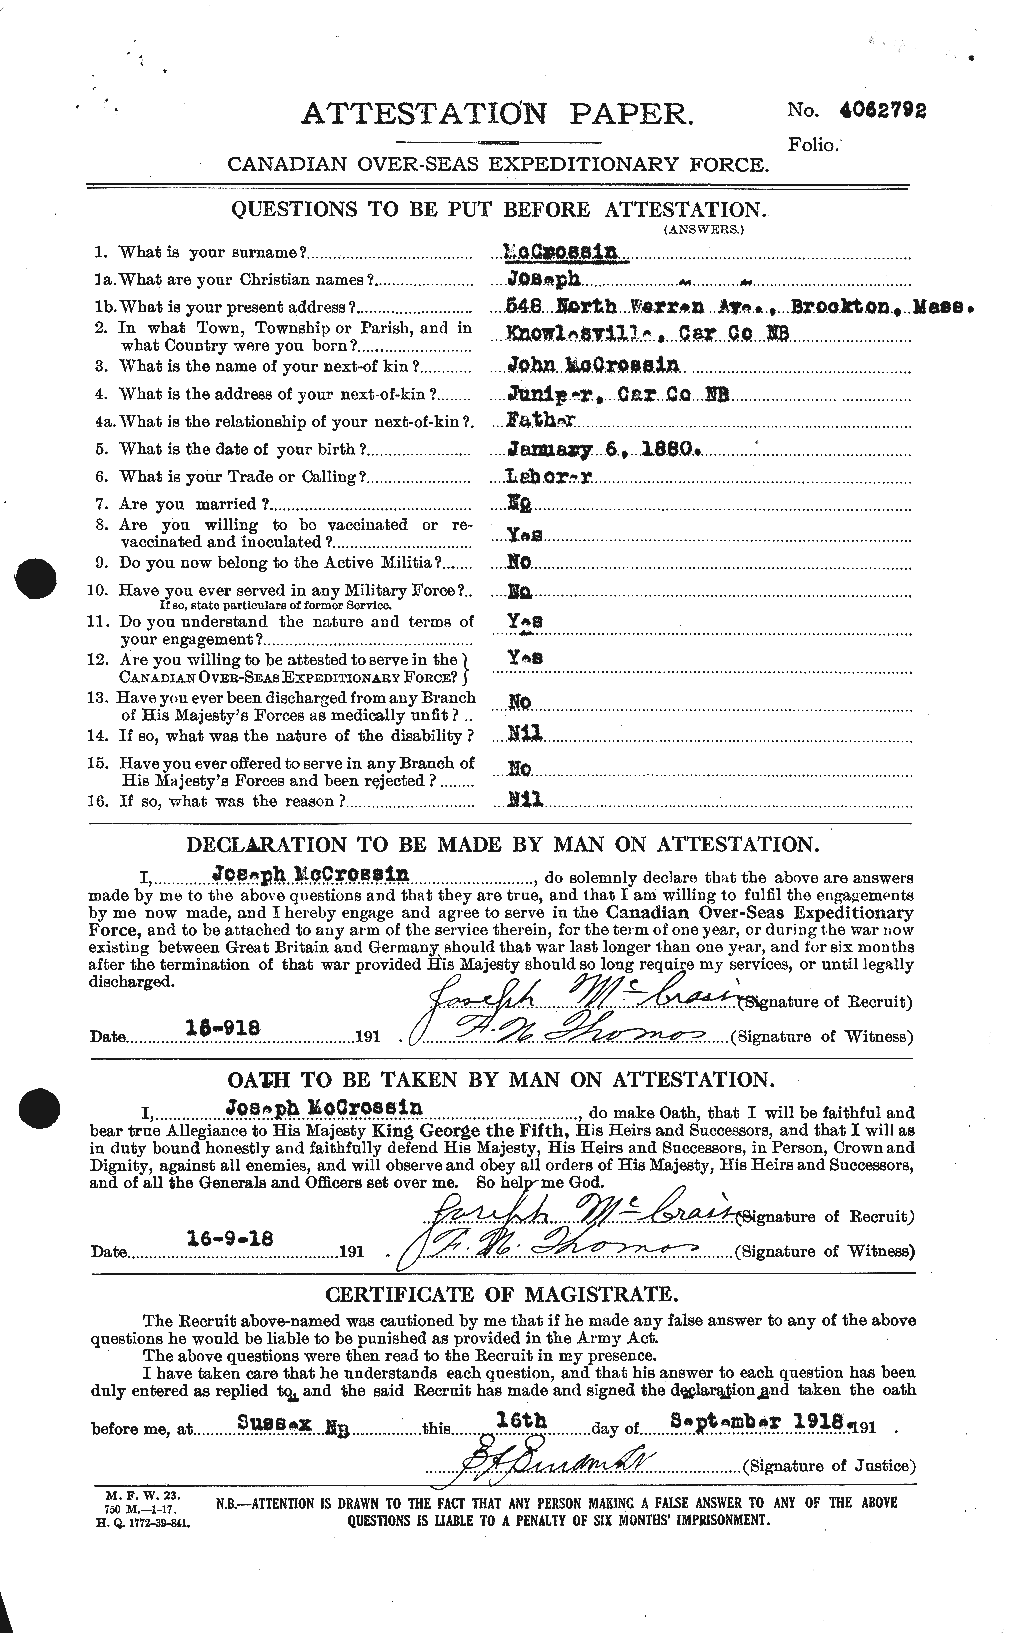 Personnel Records of the First World War - CEF 135758a